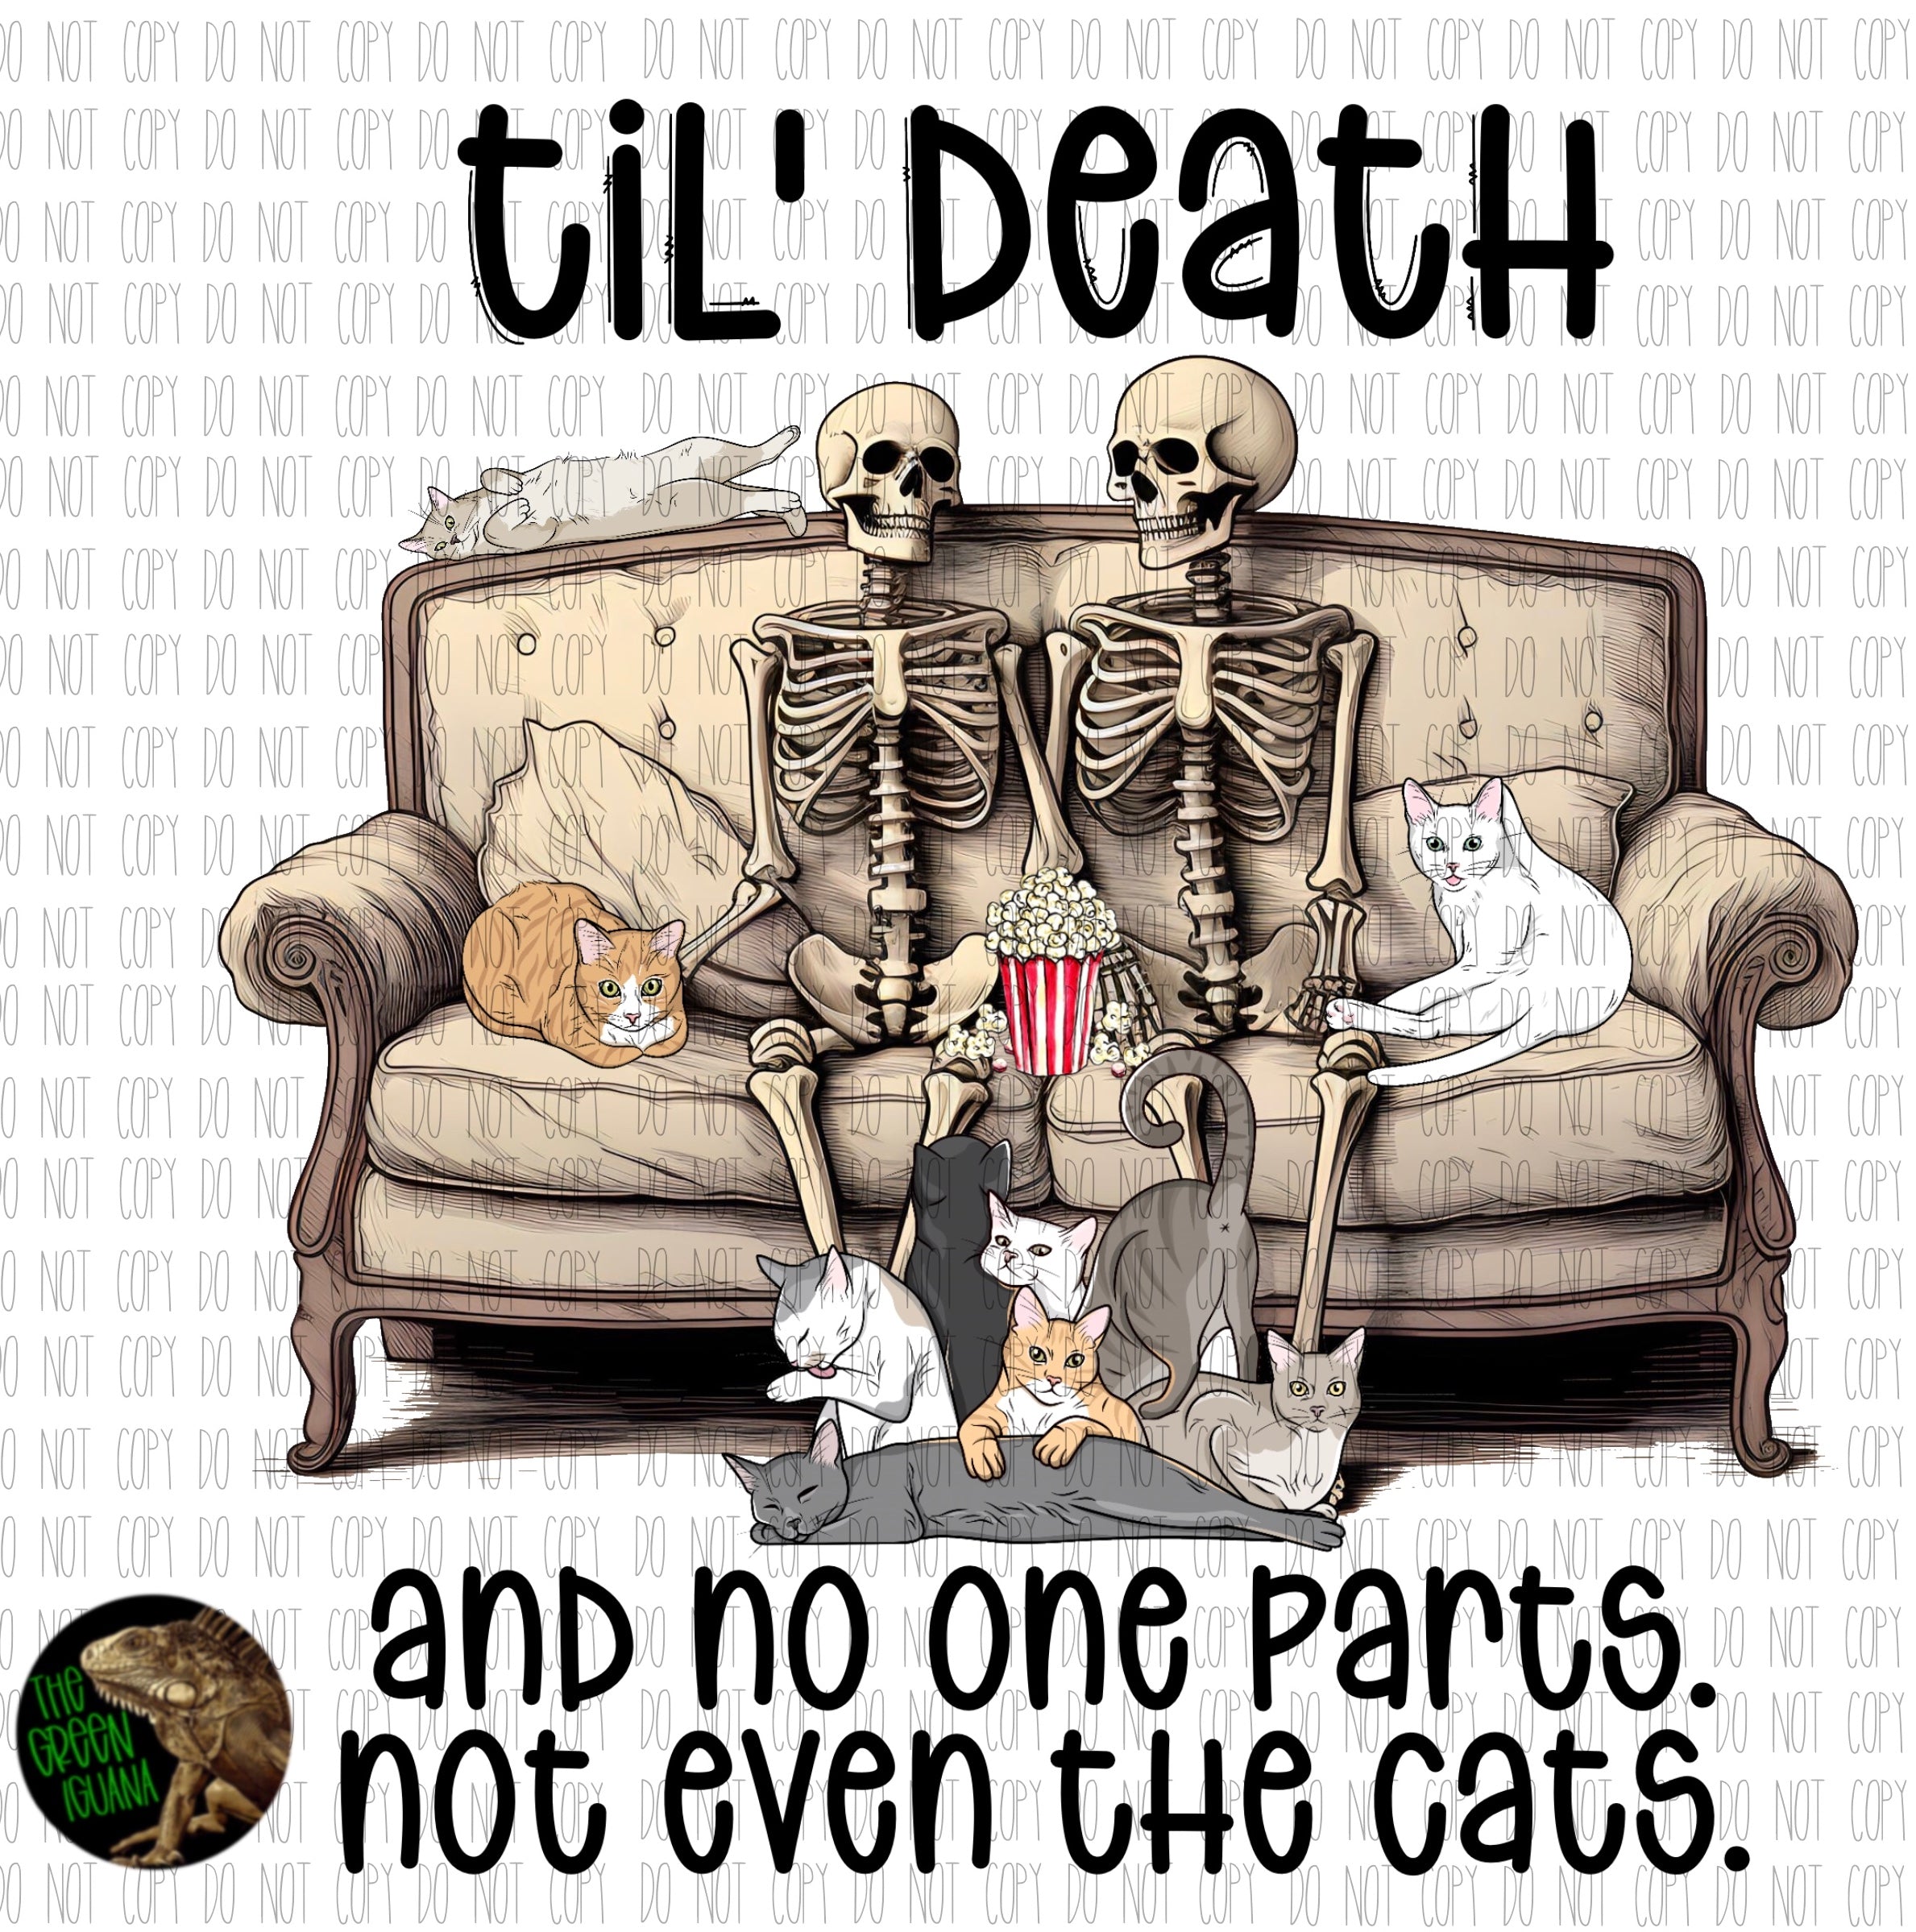 til’ death and no one parts. Not even the cats. - DIGITAL